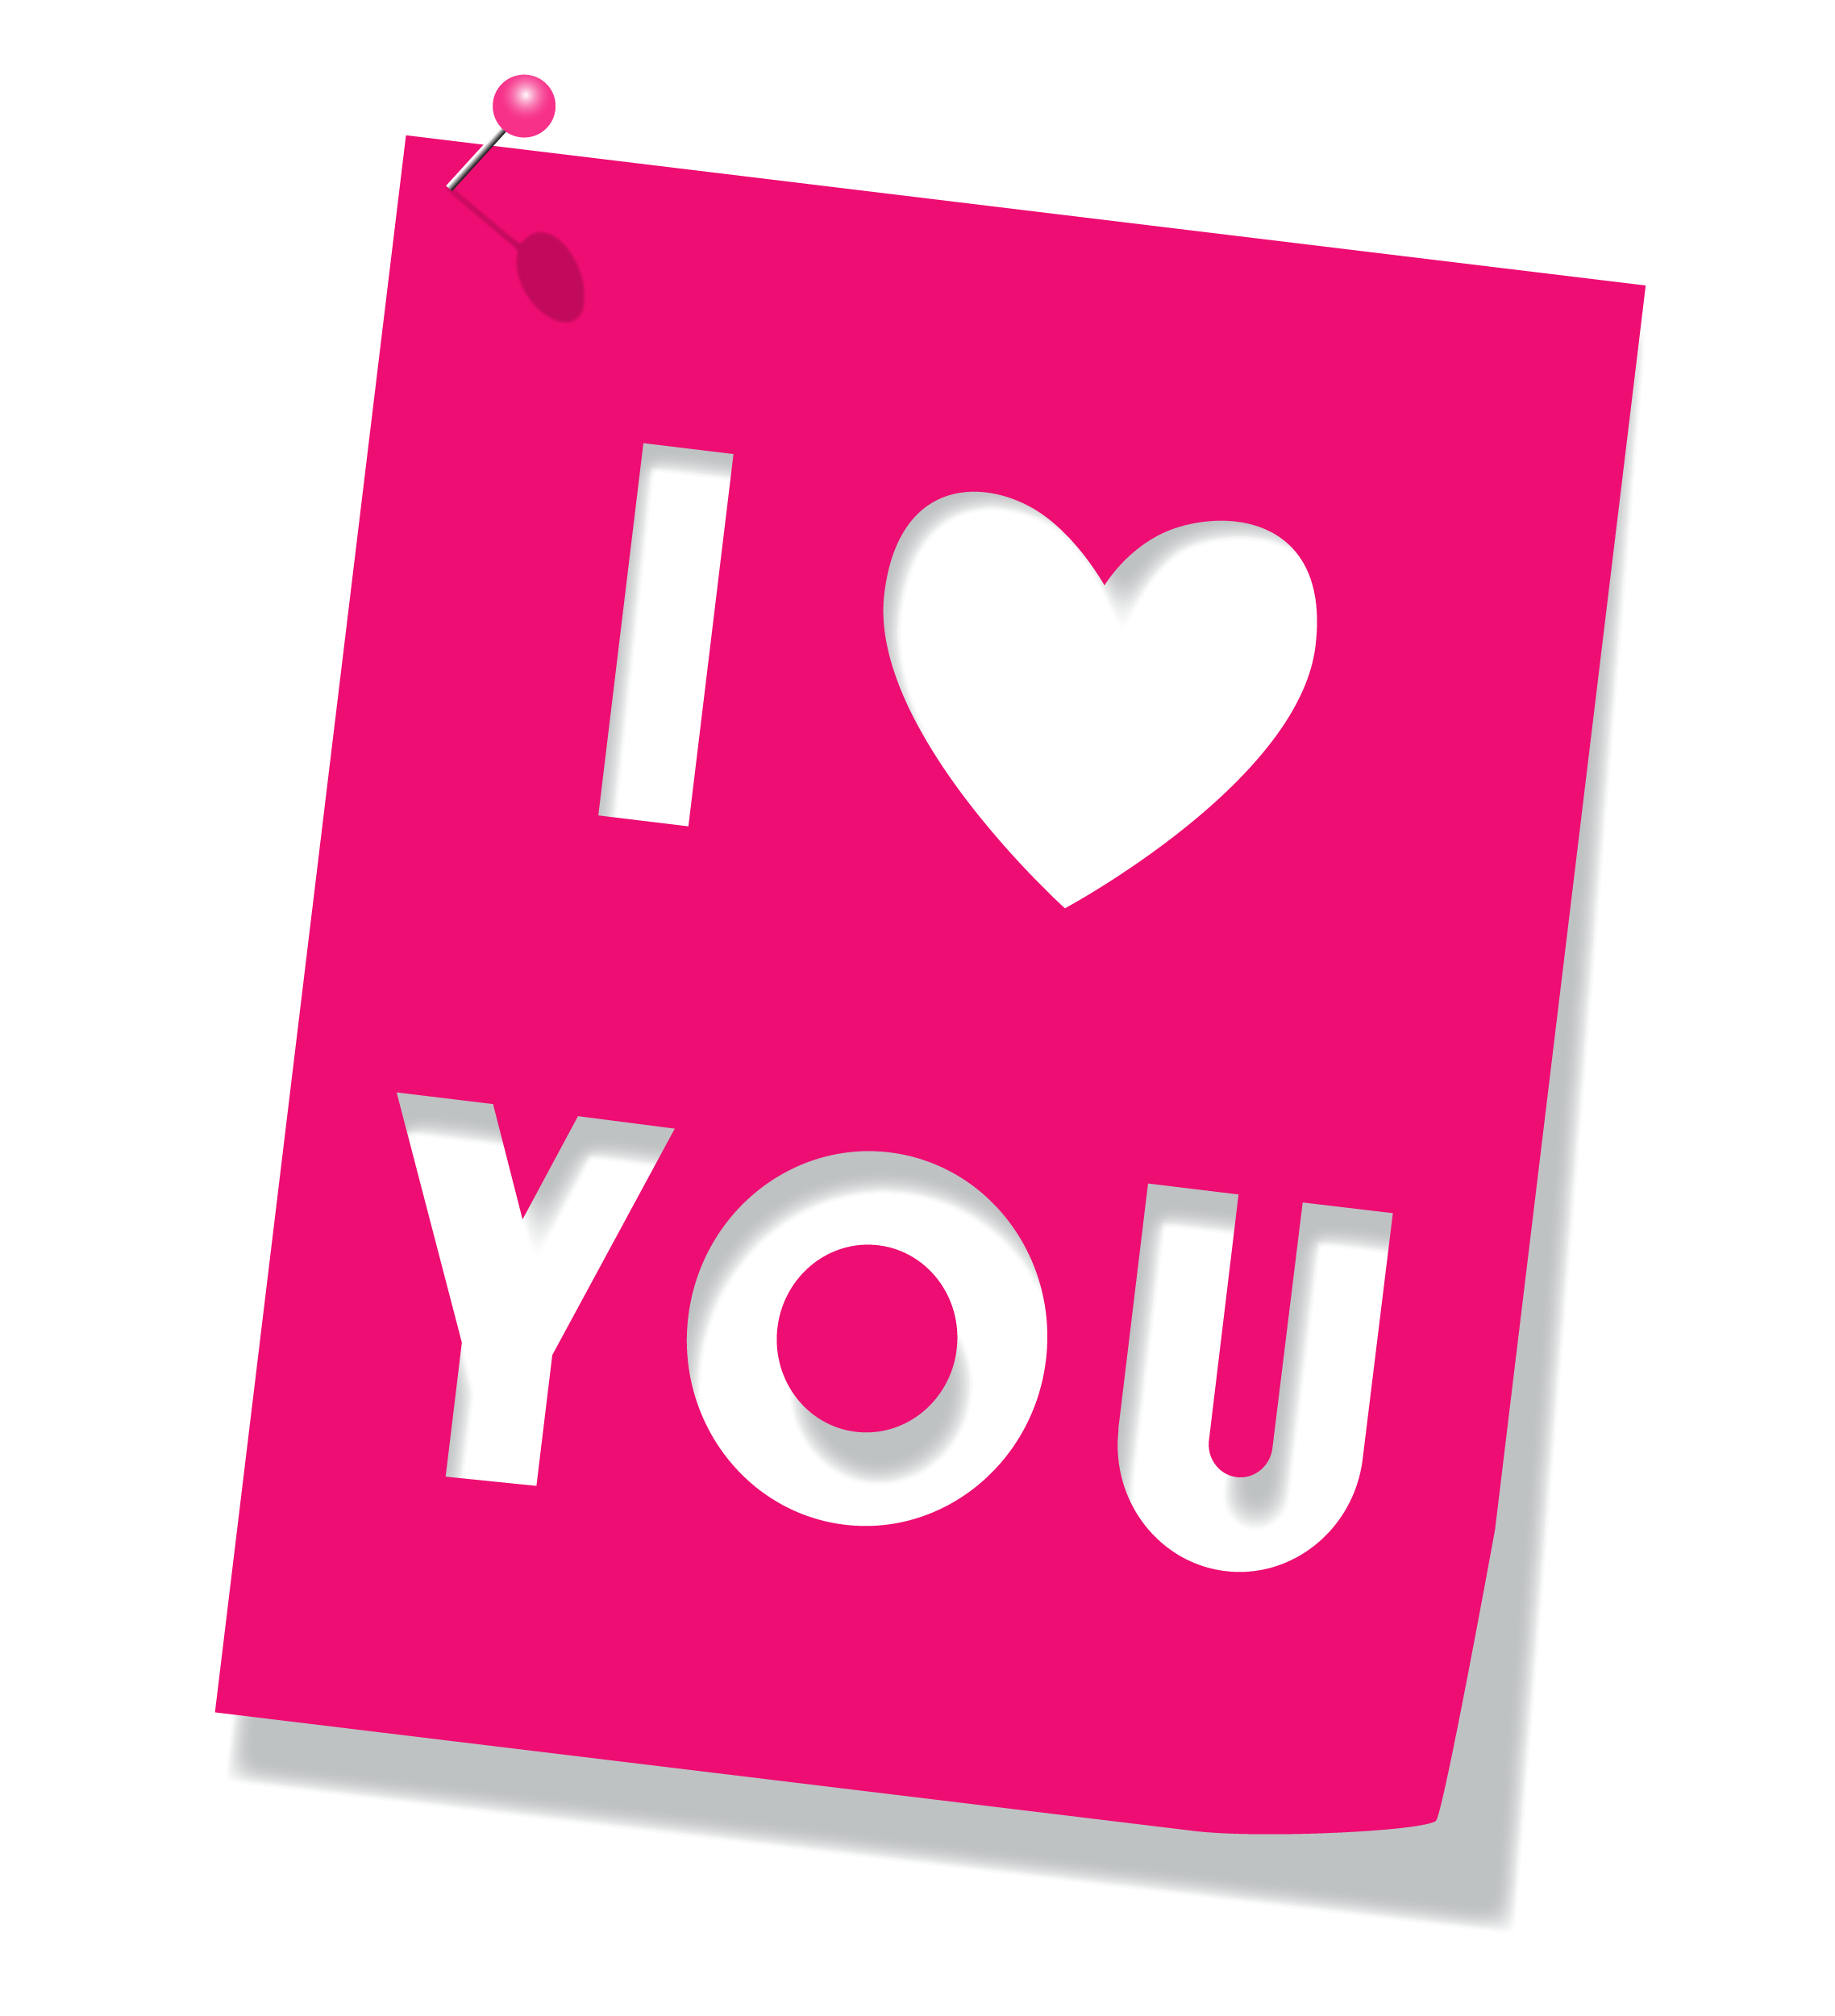 love clipart pink love you clipart picture 0